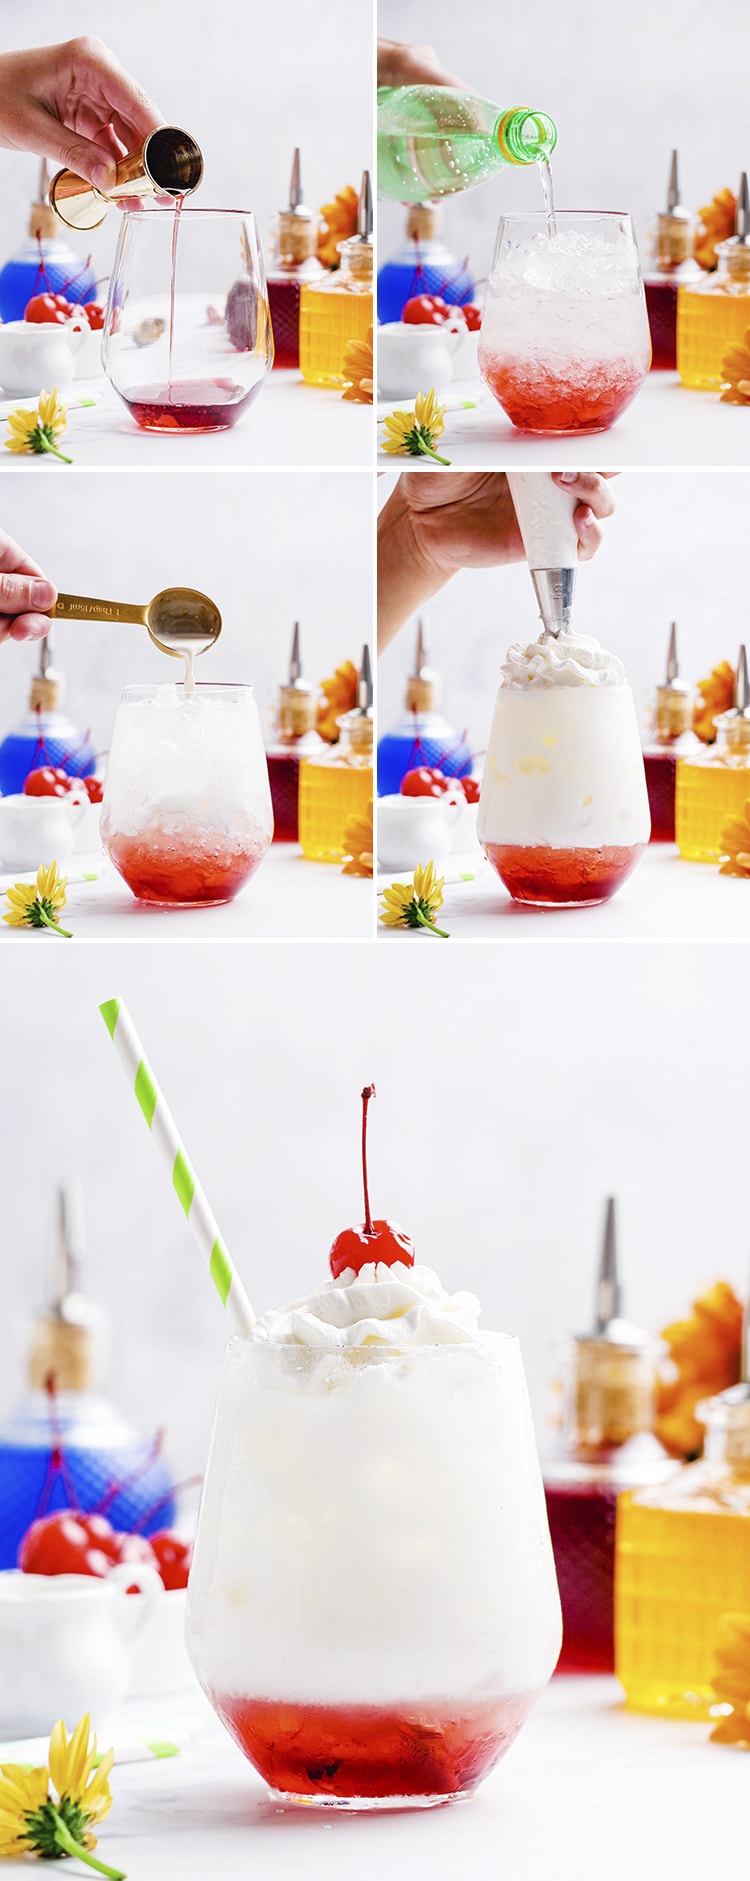 A collage of photos showing how to make Italian Cream Sodas, first adding red syrup, then club soda, then half and half, then whipped cream. 